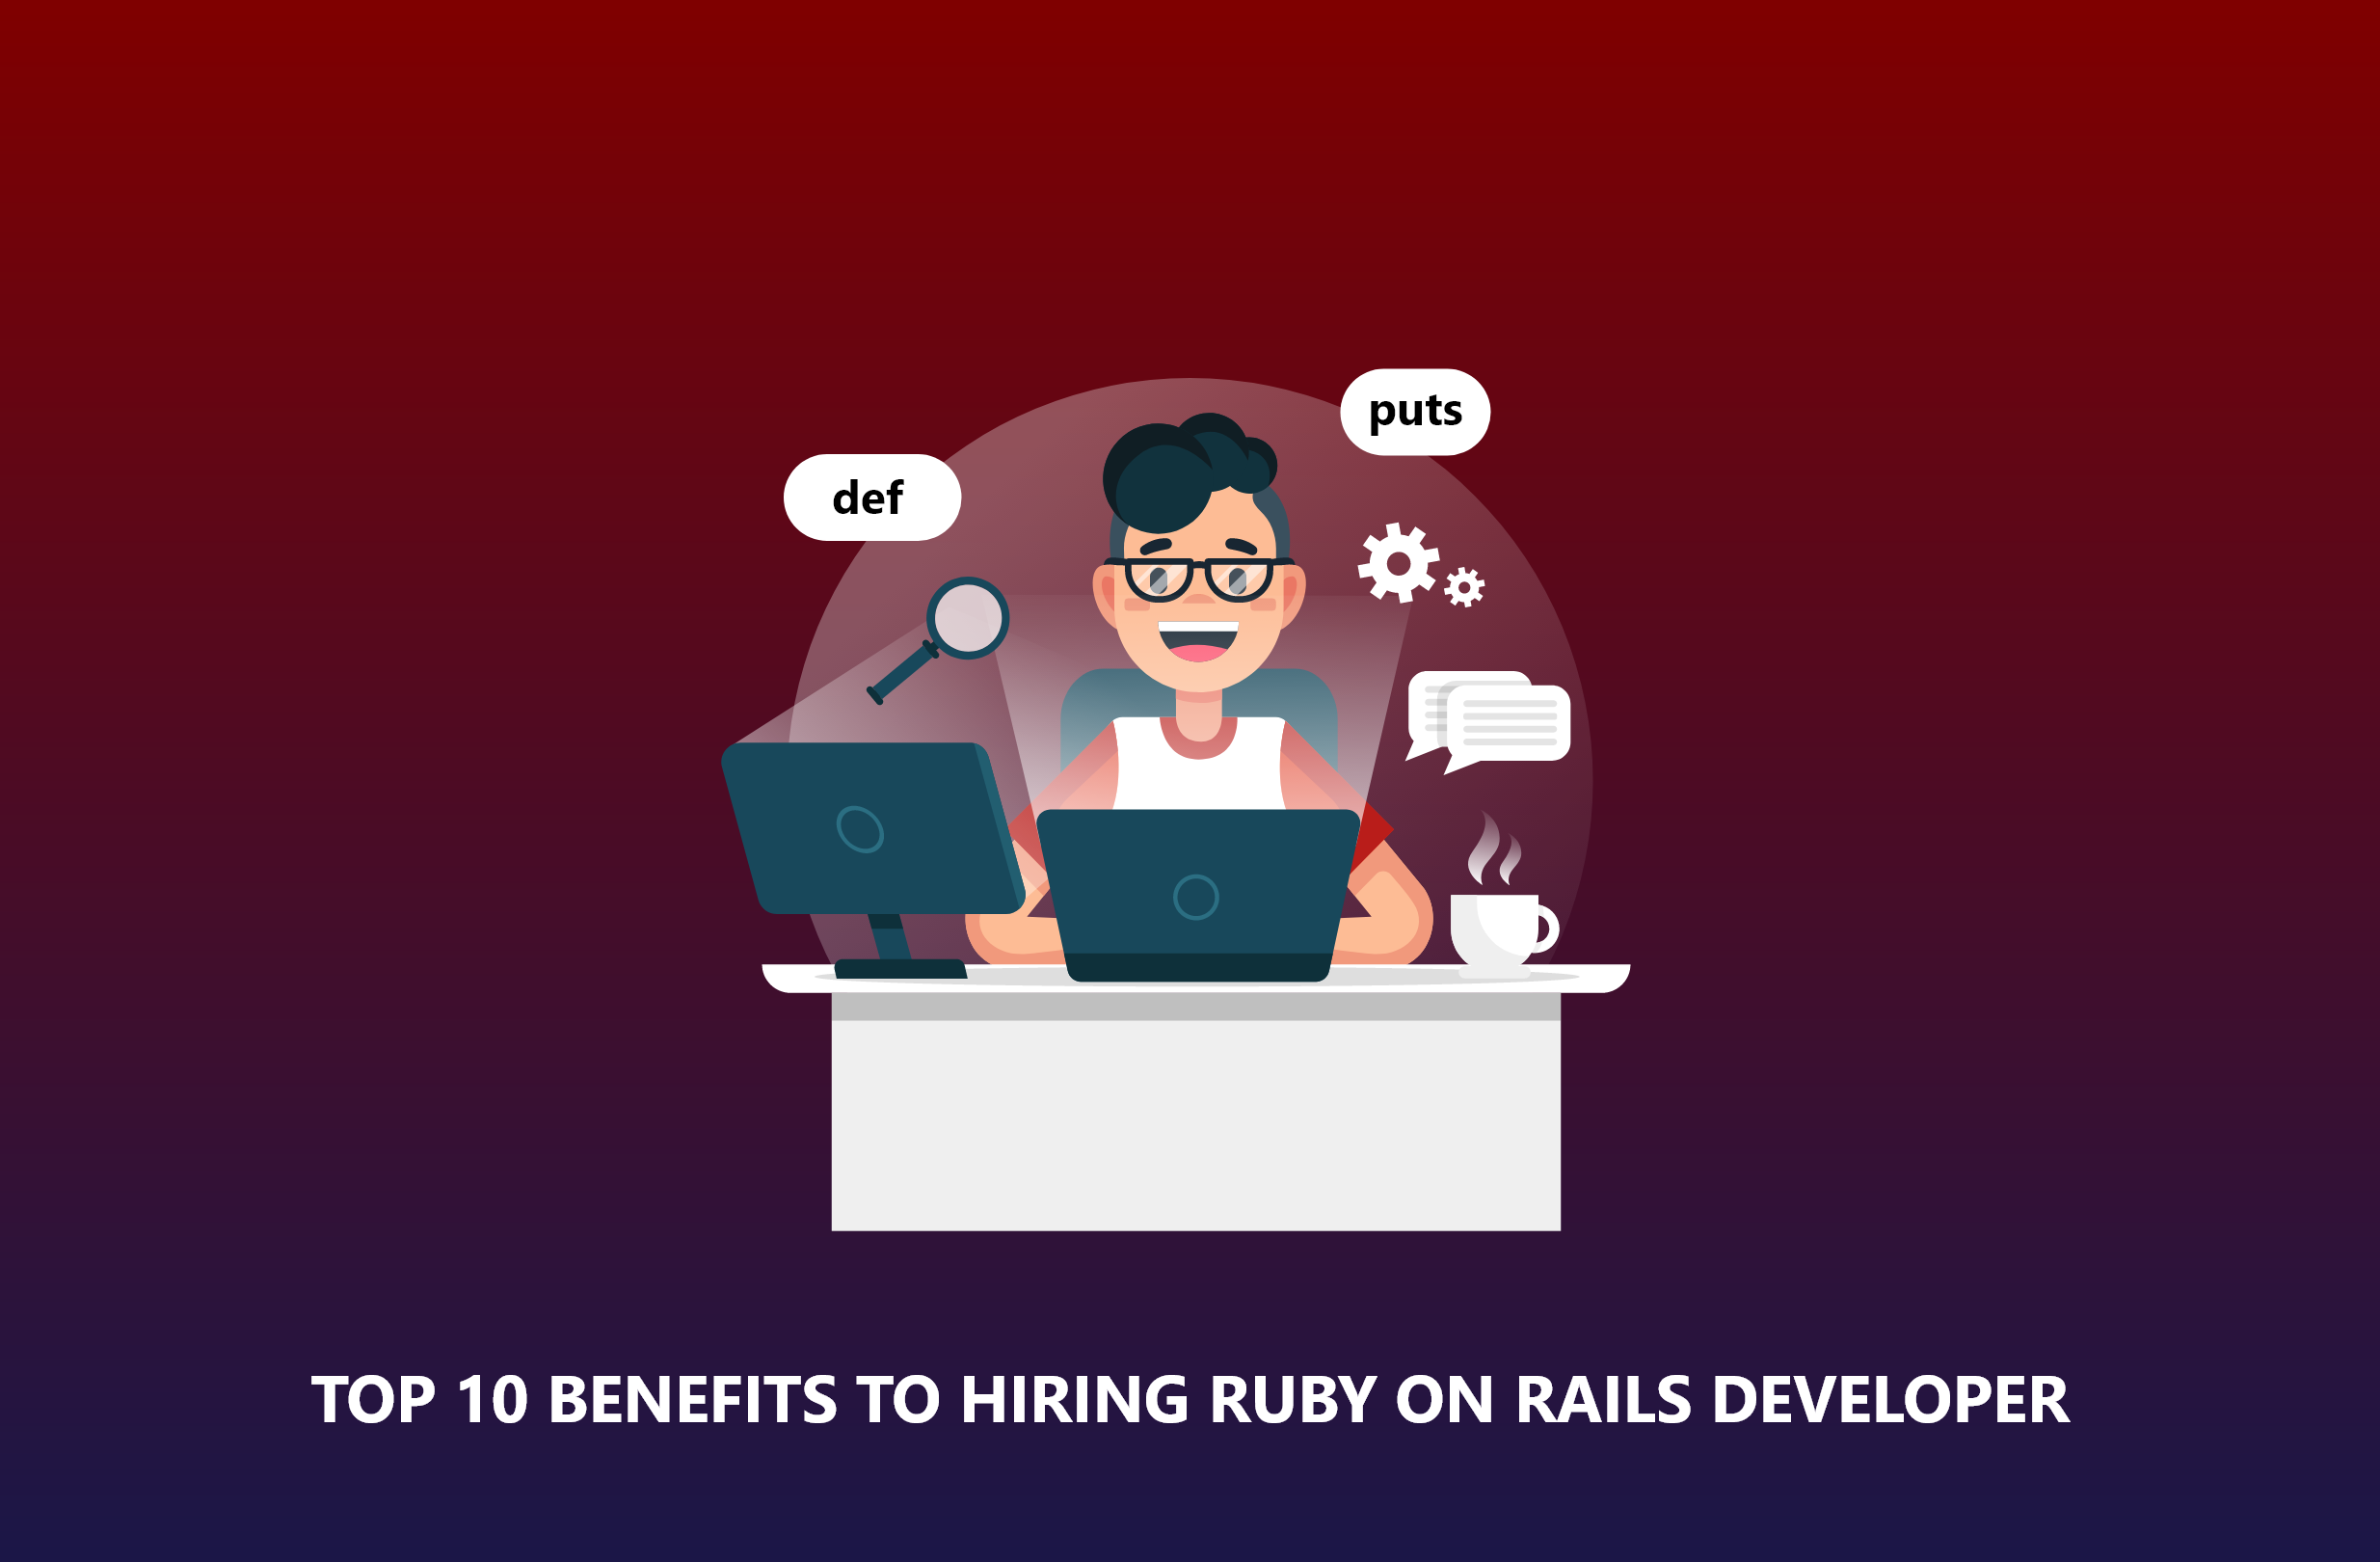 Top 10 benefits to hiring ruby on rails developer 